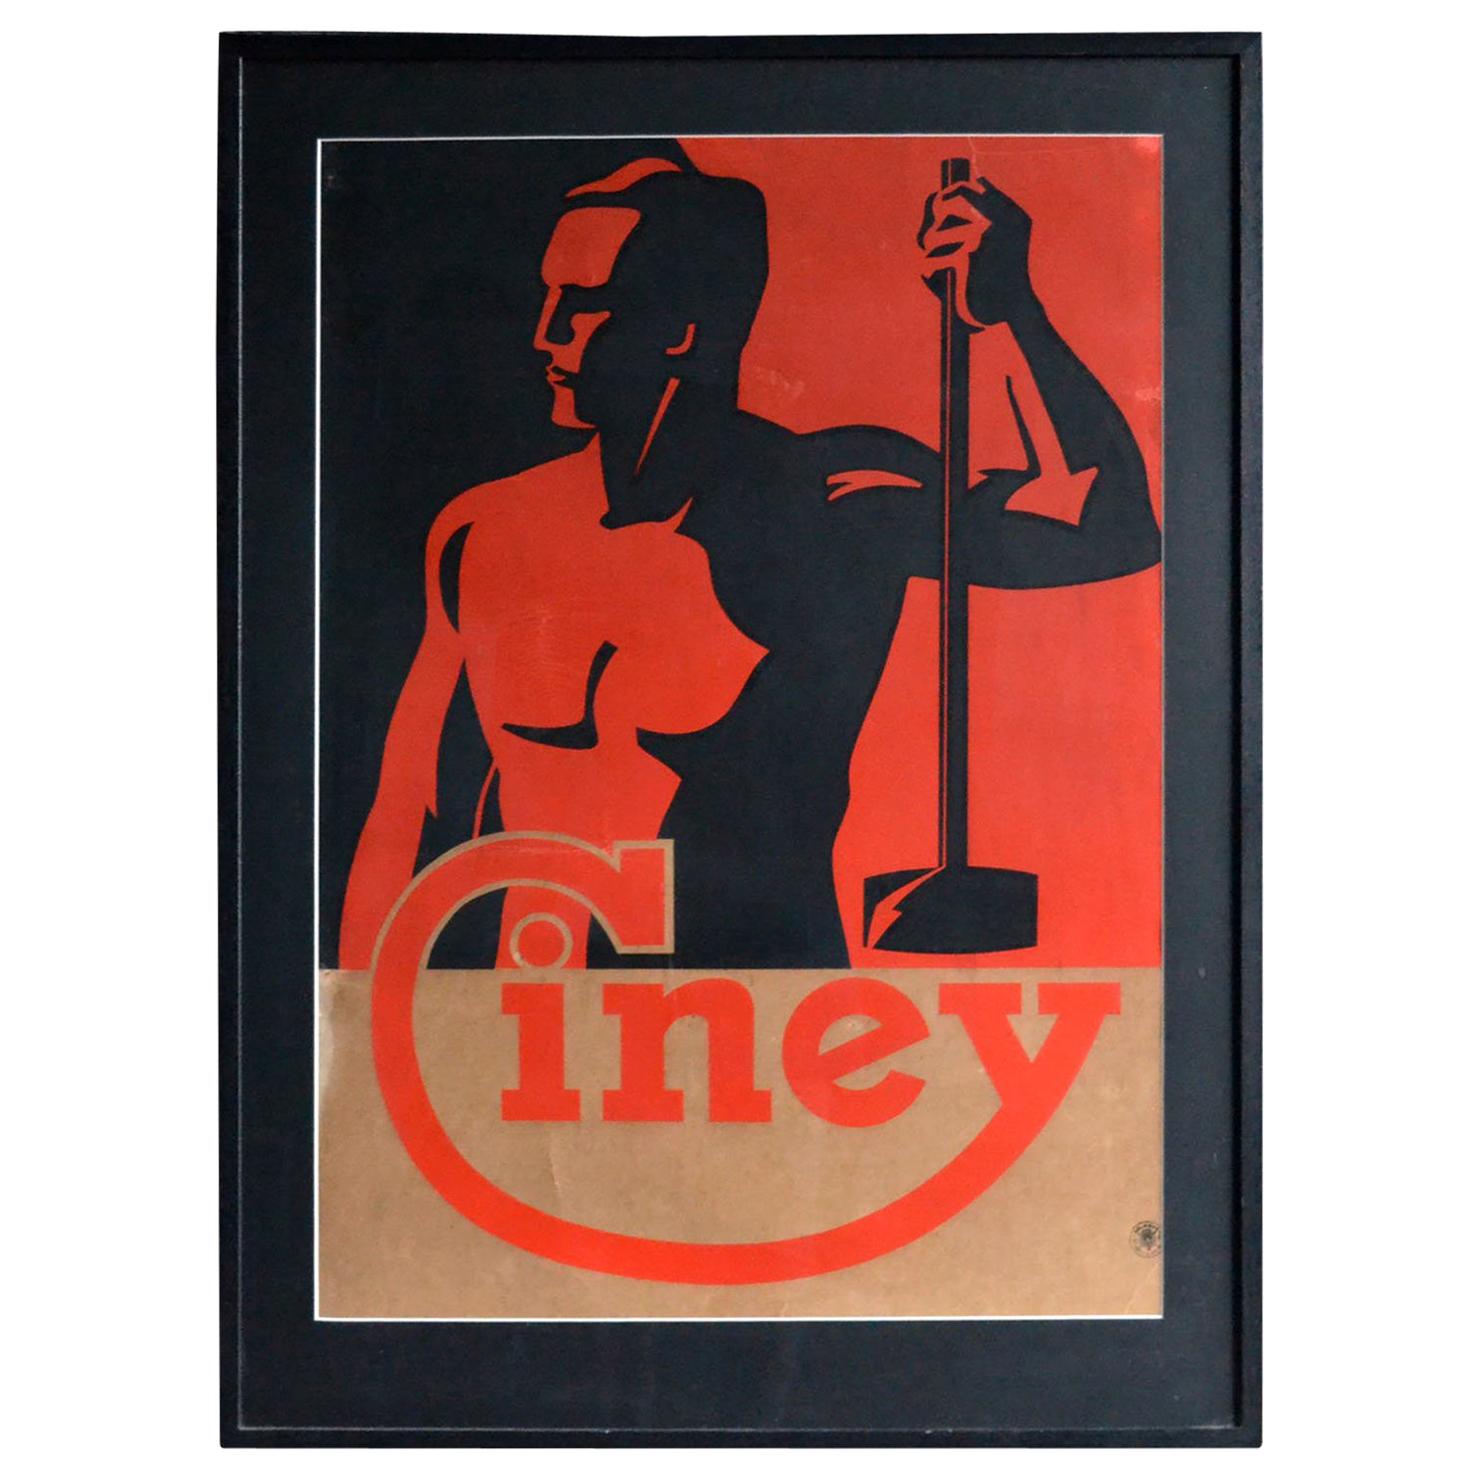 Art Deco Poster Advertising Ciney Belgium 1930s in Red and Black